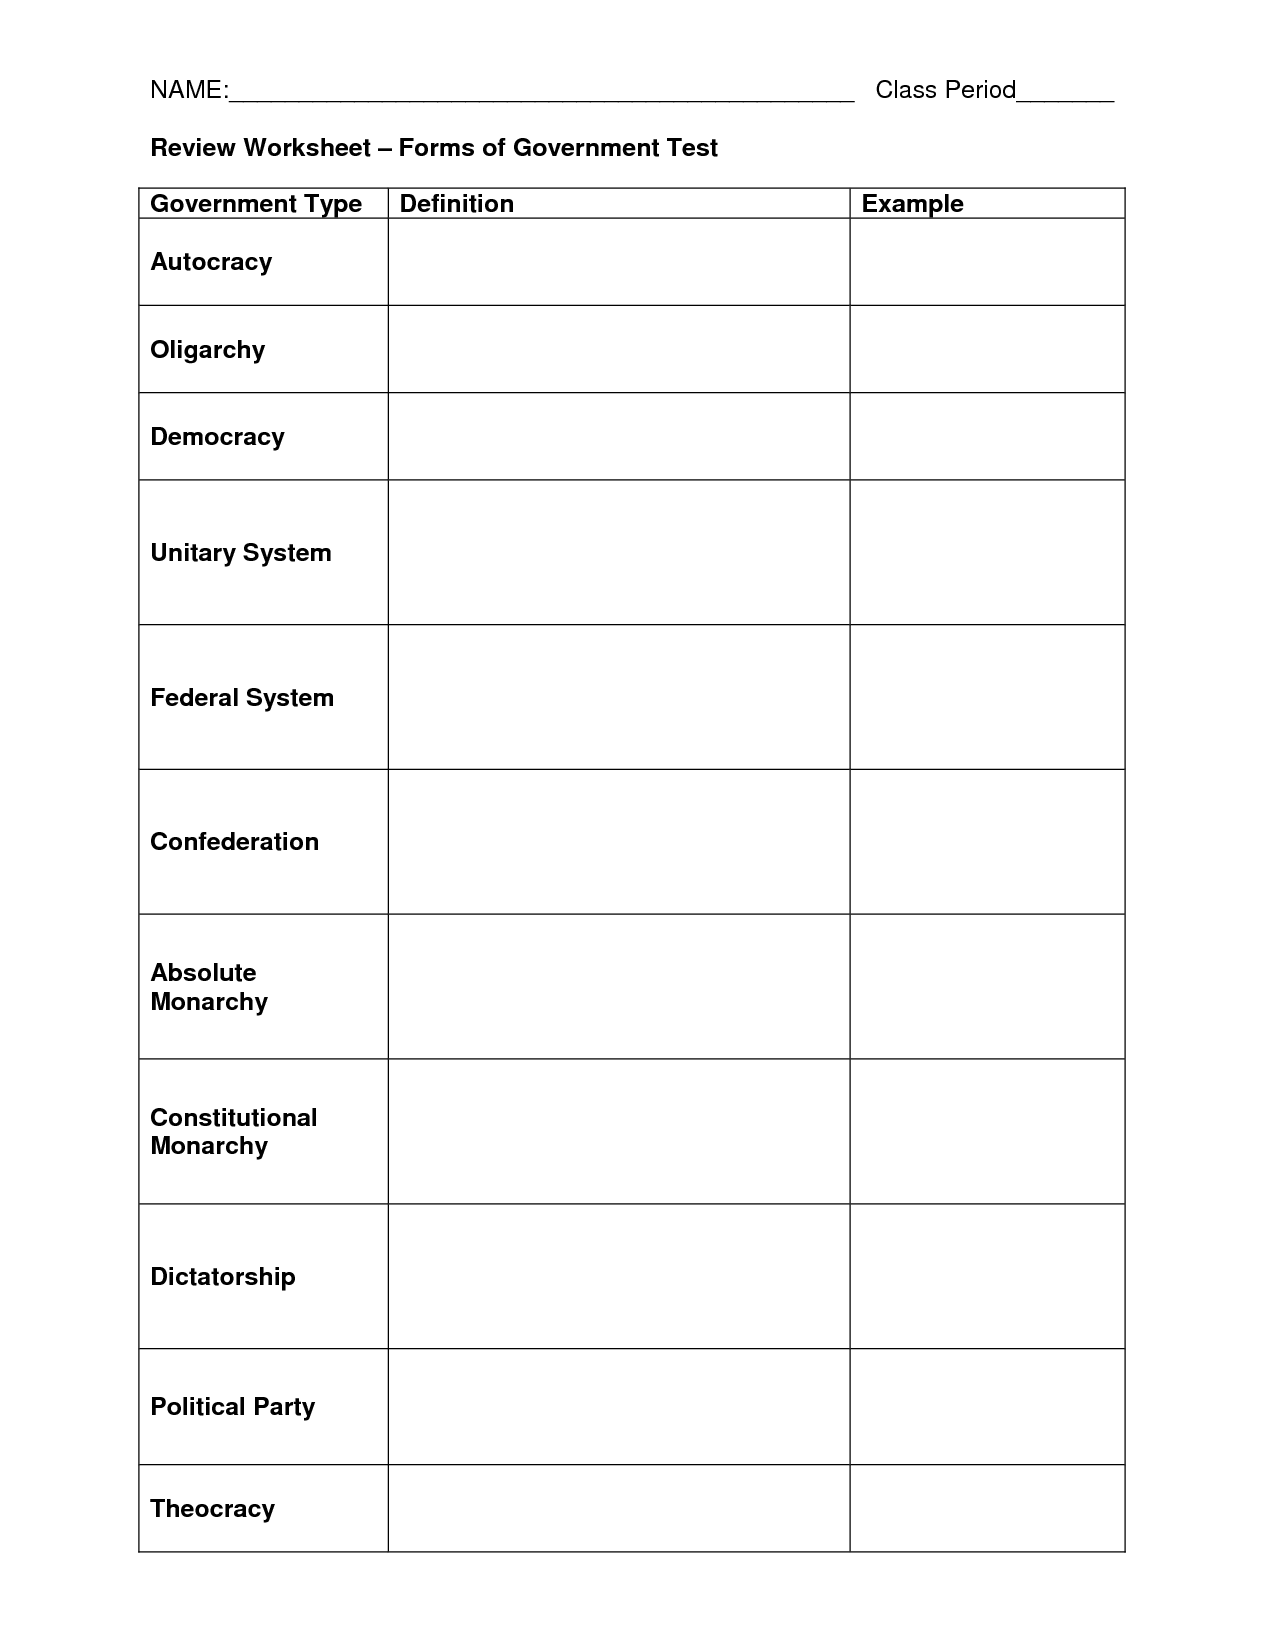 15-best-images-of-the-branches-of-government-worksheet-three-branches-of-government-worksheet